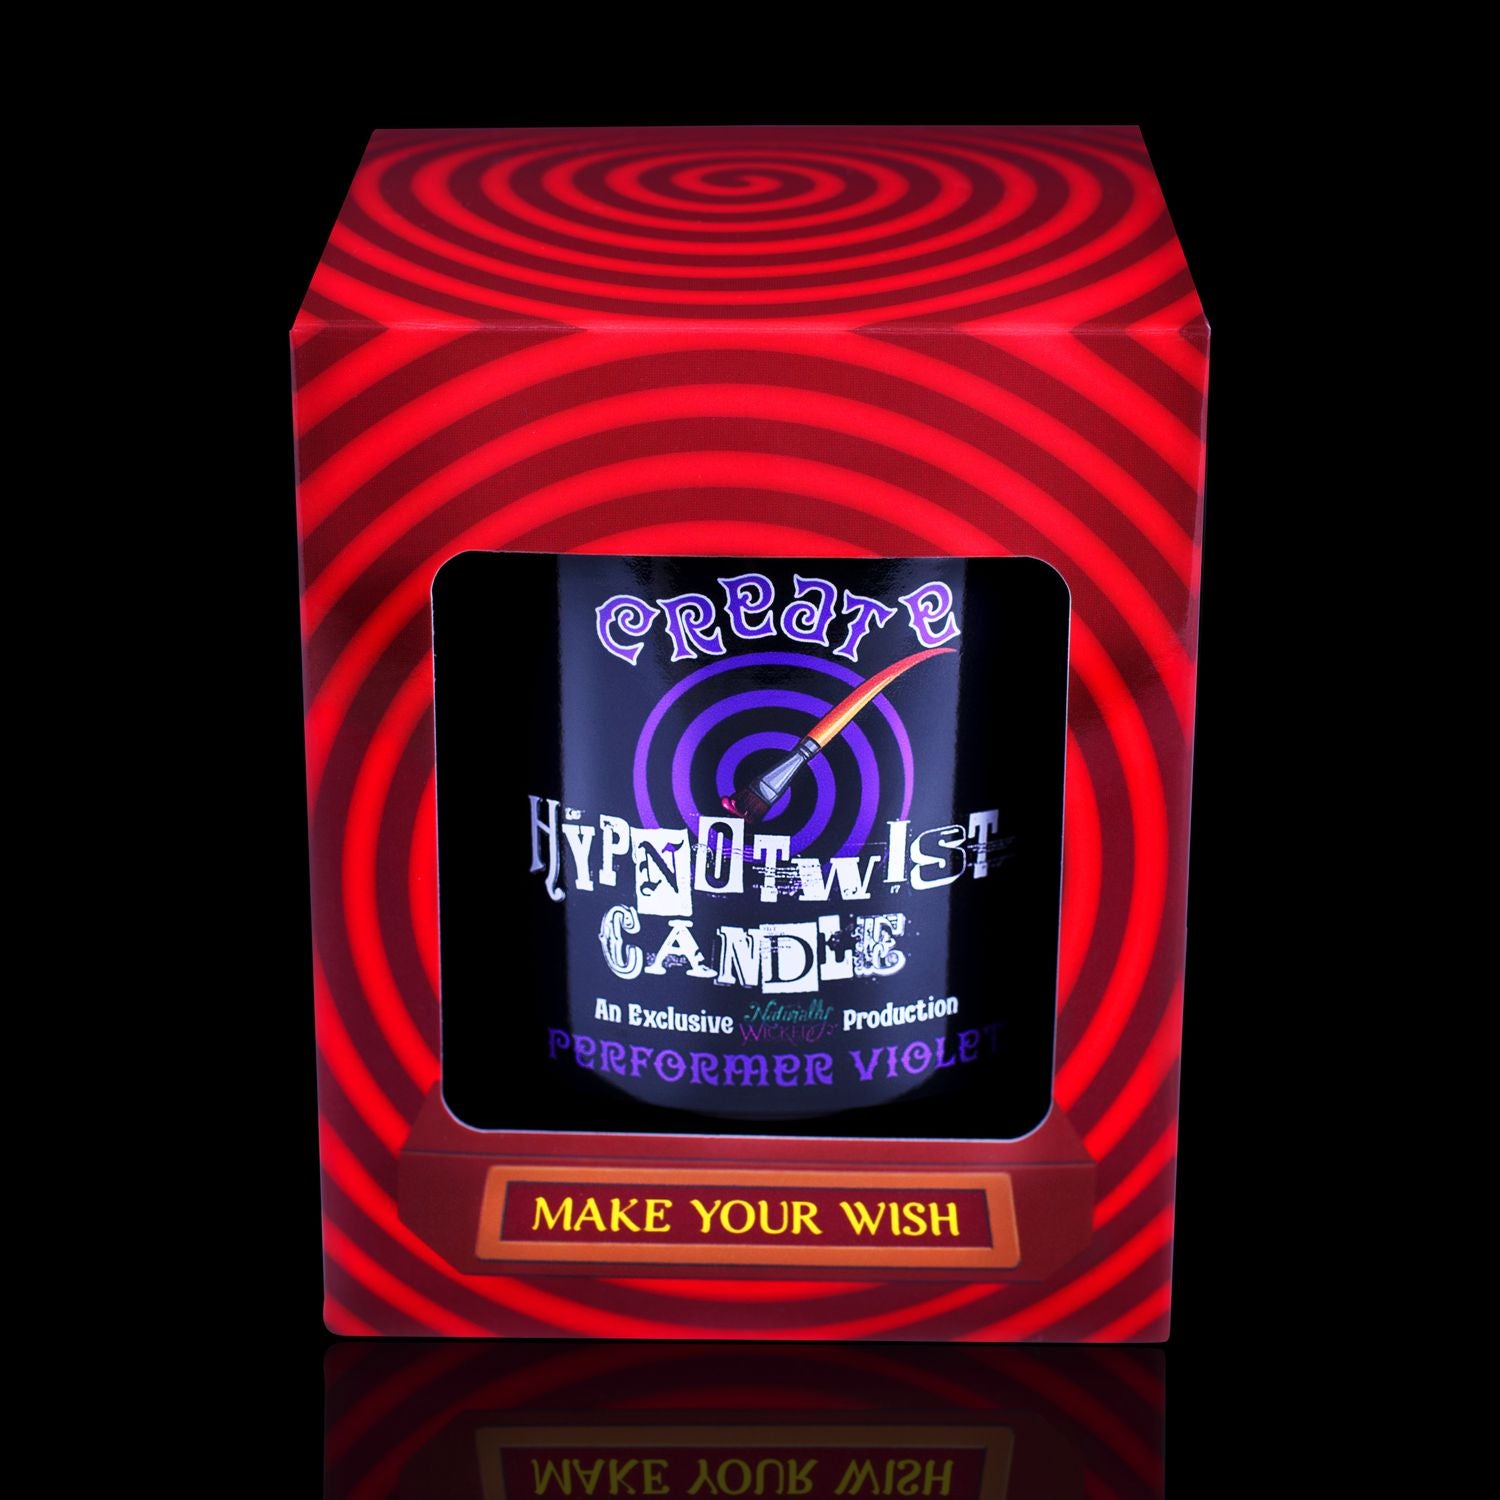 Make Your Wish With The Naturally Wicked Hypnotwist Create Candle, Plant-based Soy Purple Wax Scented With Performer Violet Breeze, Including A Lepidolite Crystal Spinning Top, Mirrored Lid & Red Circus Hypnotic Gift Box